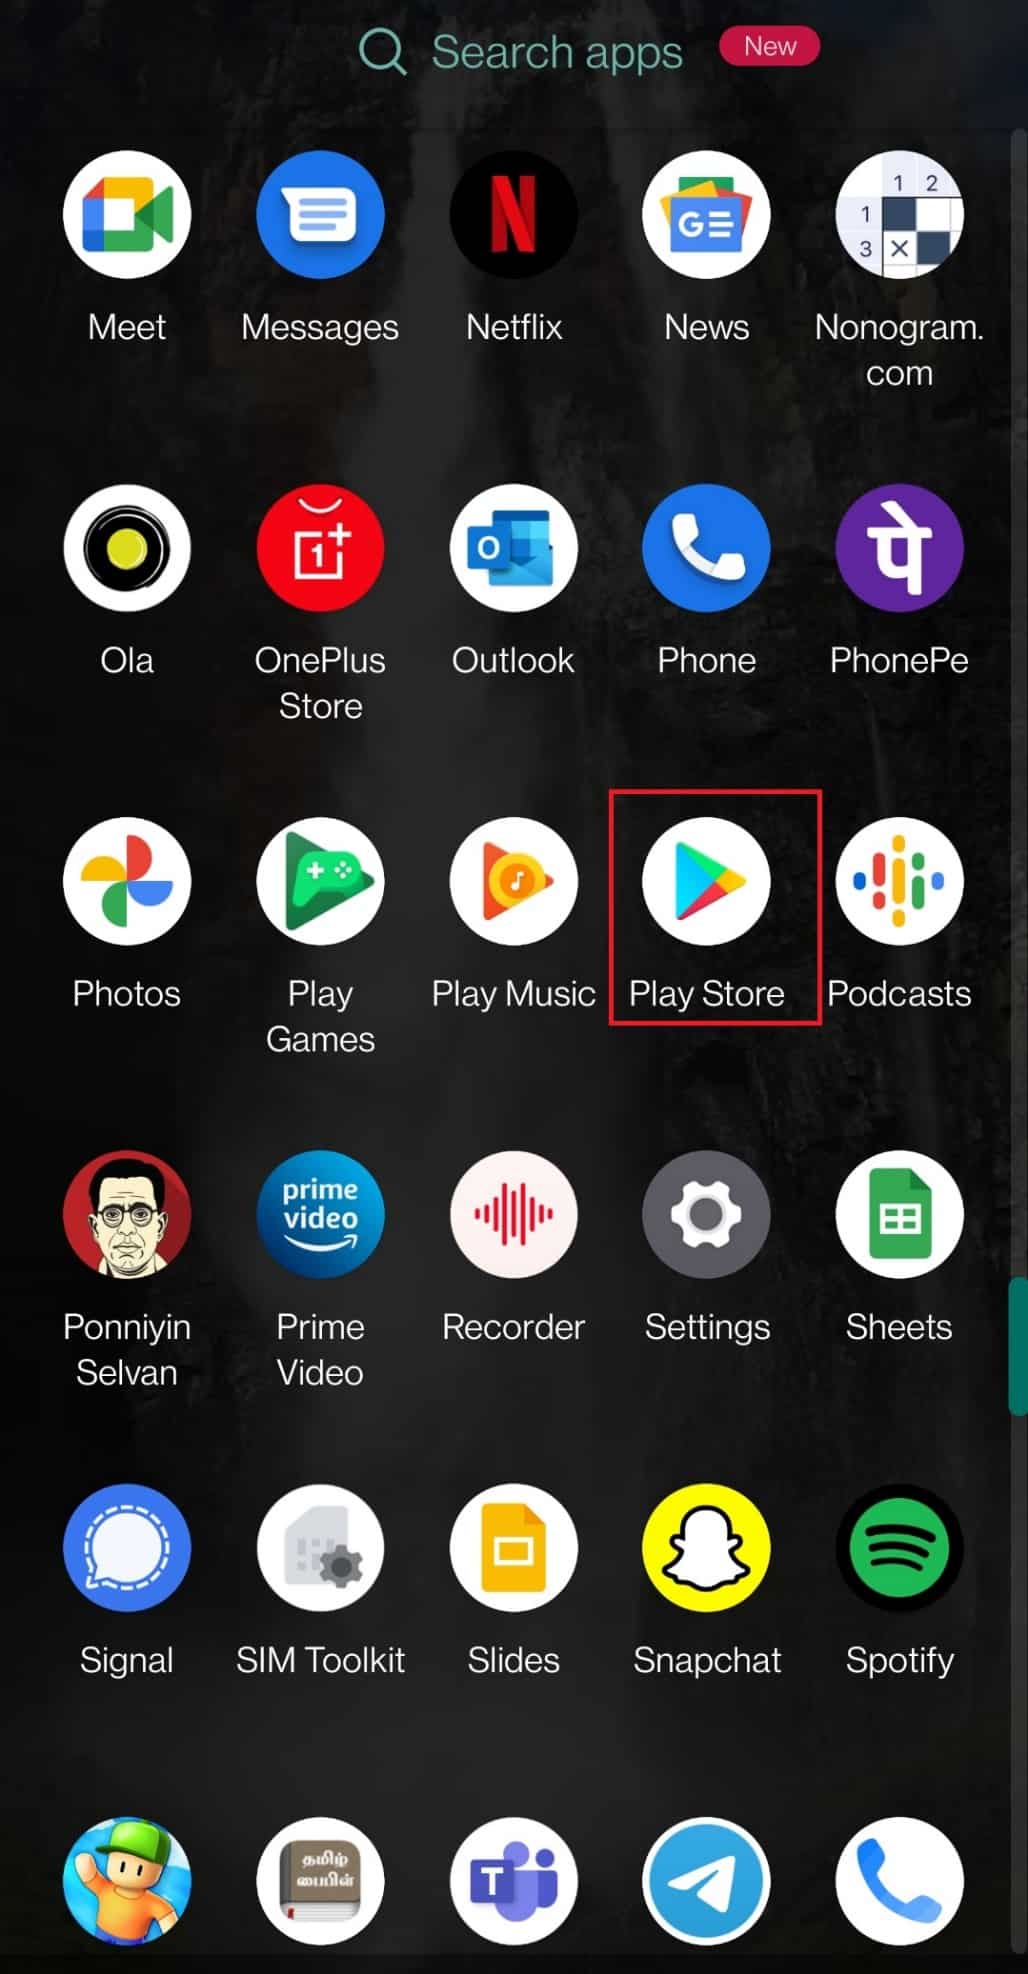 Open the Play Store on your Android phone